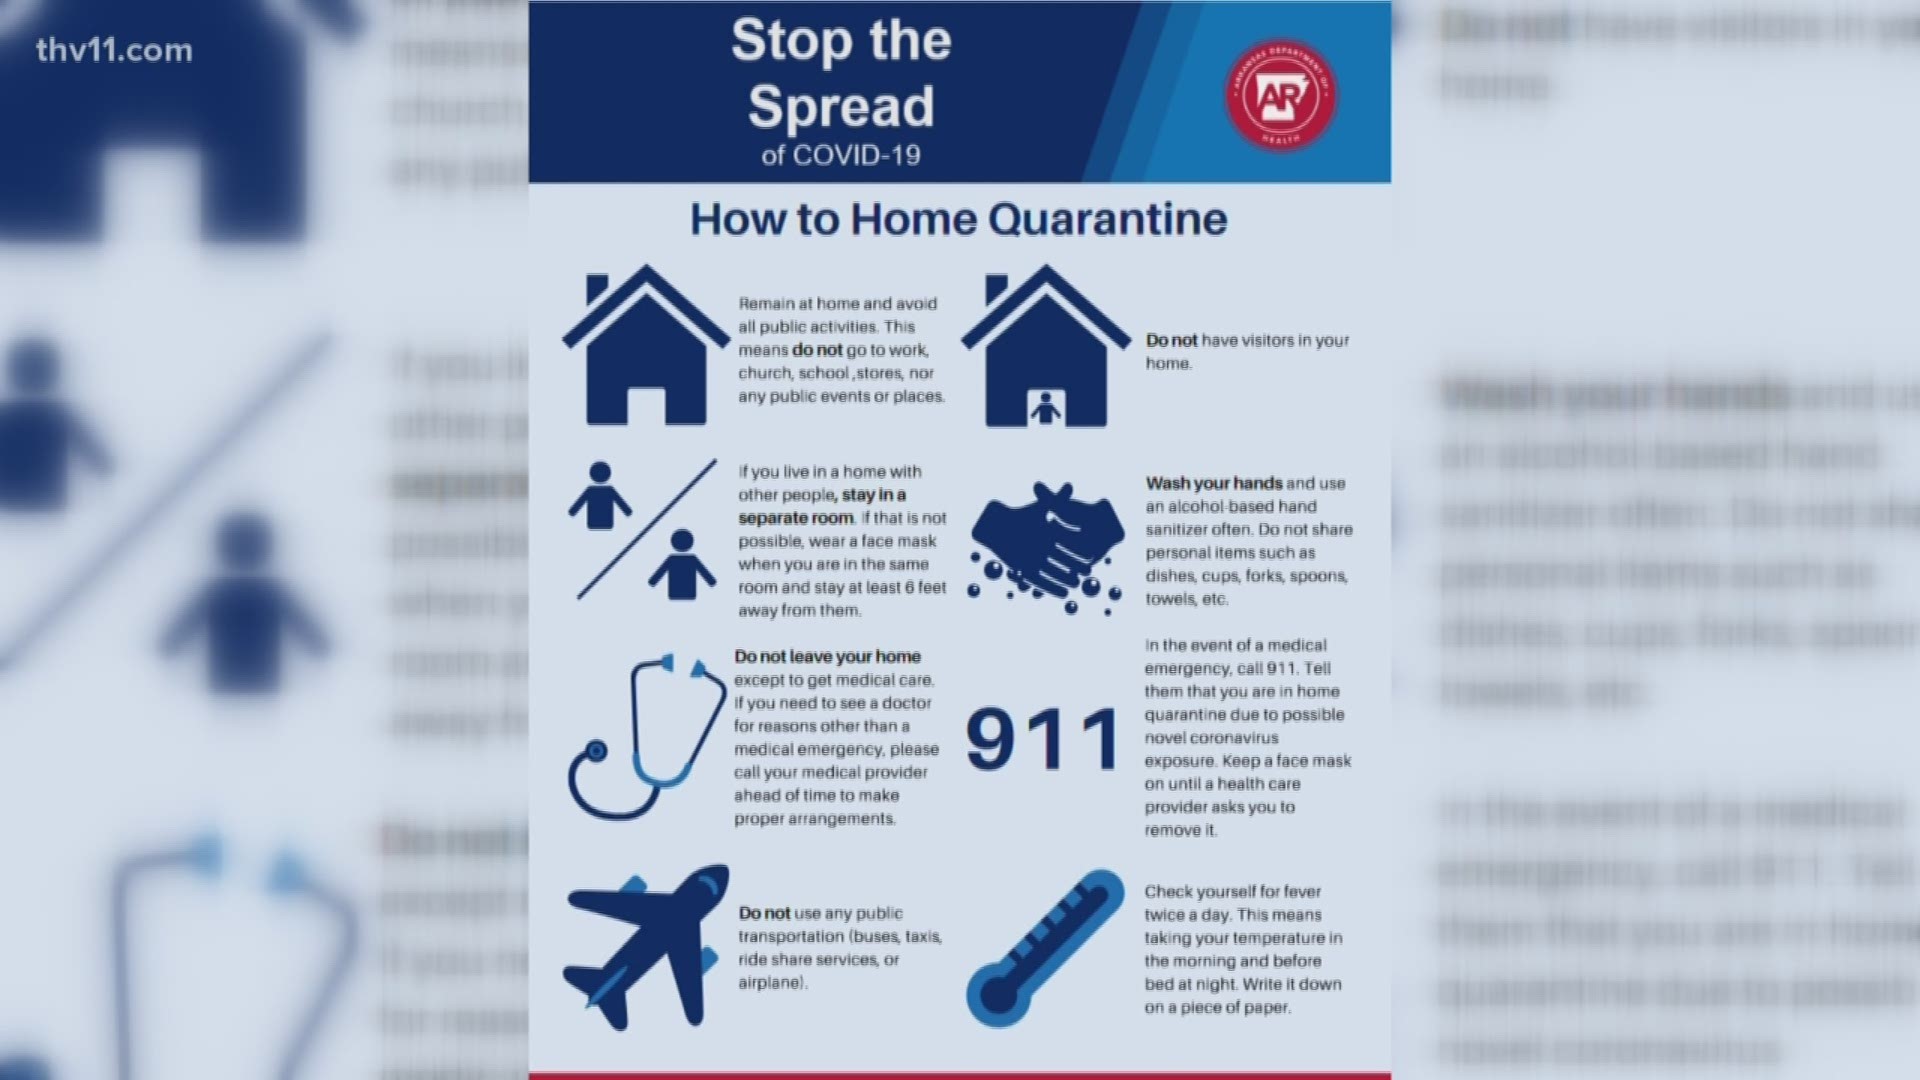 If you traveled recently to New York City or overseas, the Arkansas Department of Health wants you to quarantine yourself at home for 14 days.